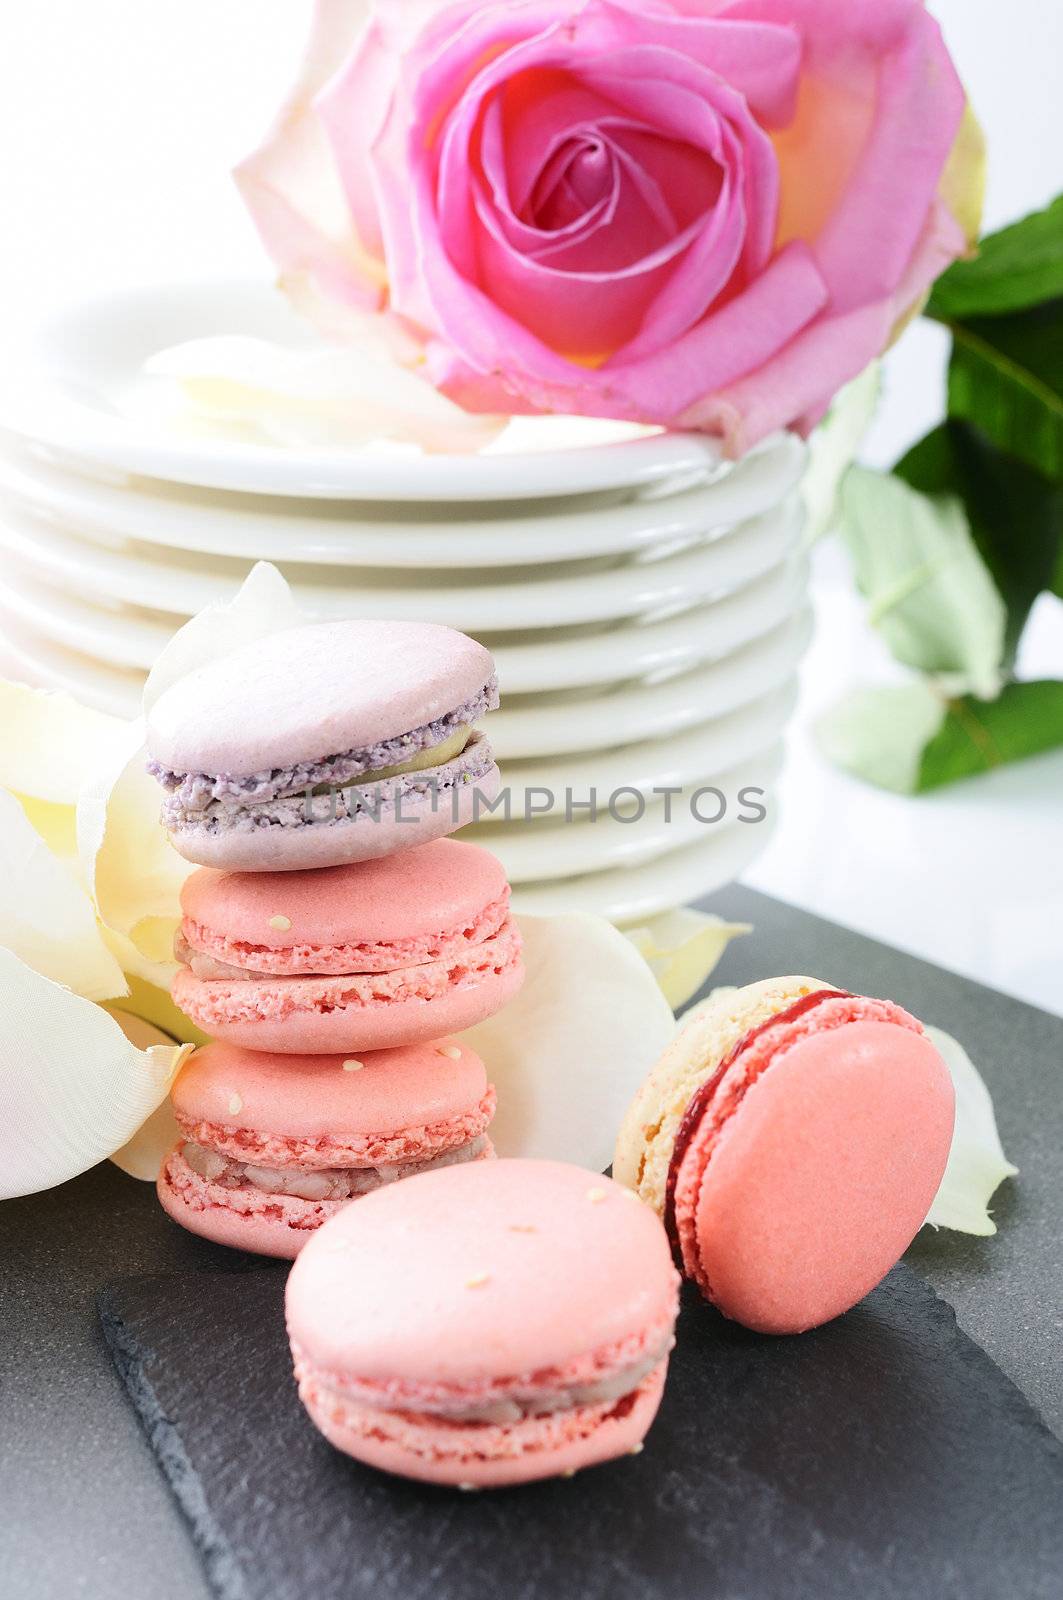 shaped macaroons for valentine's day or mother's day